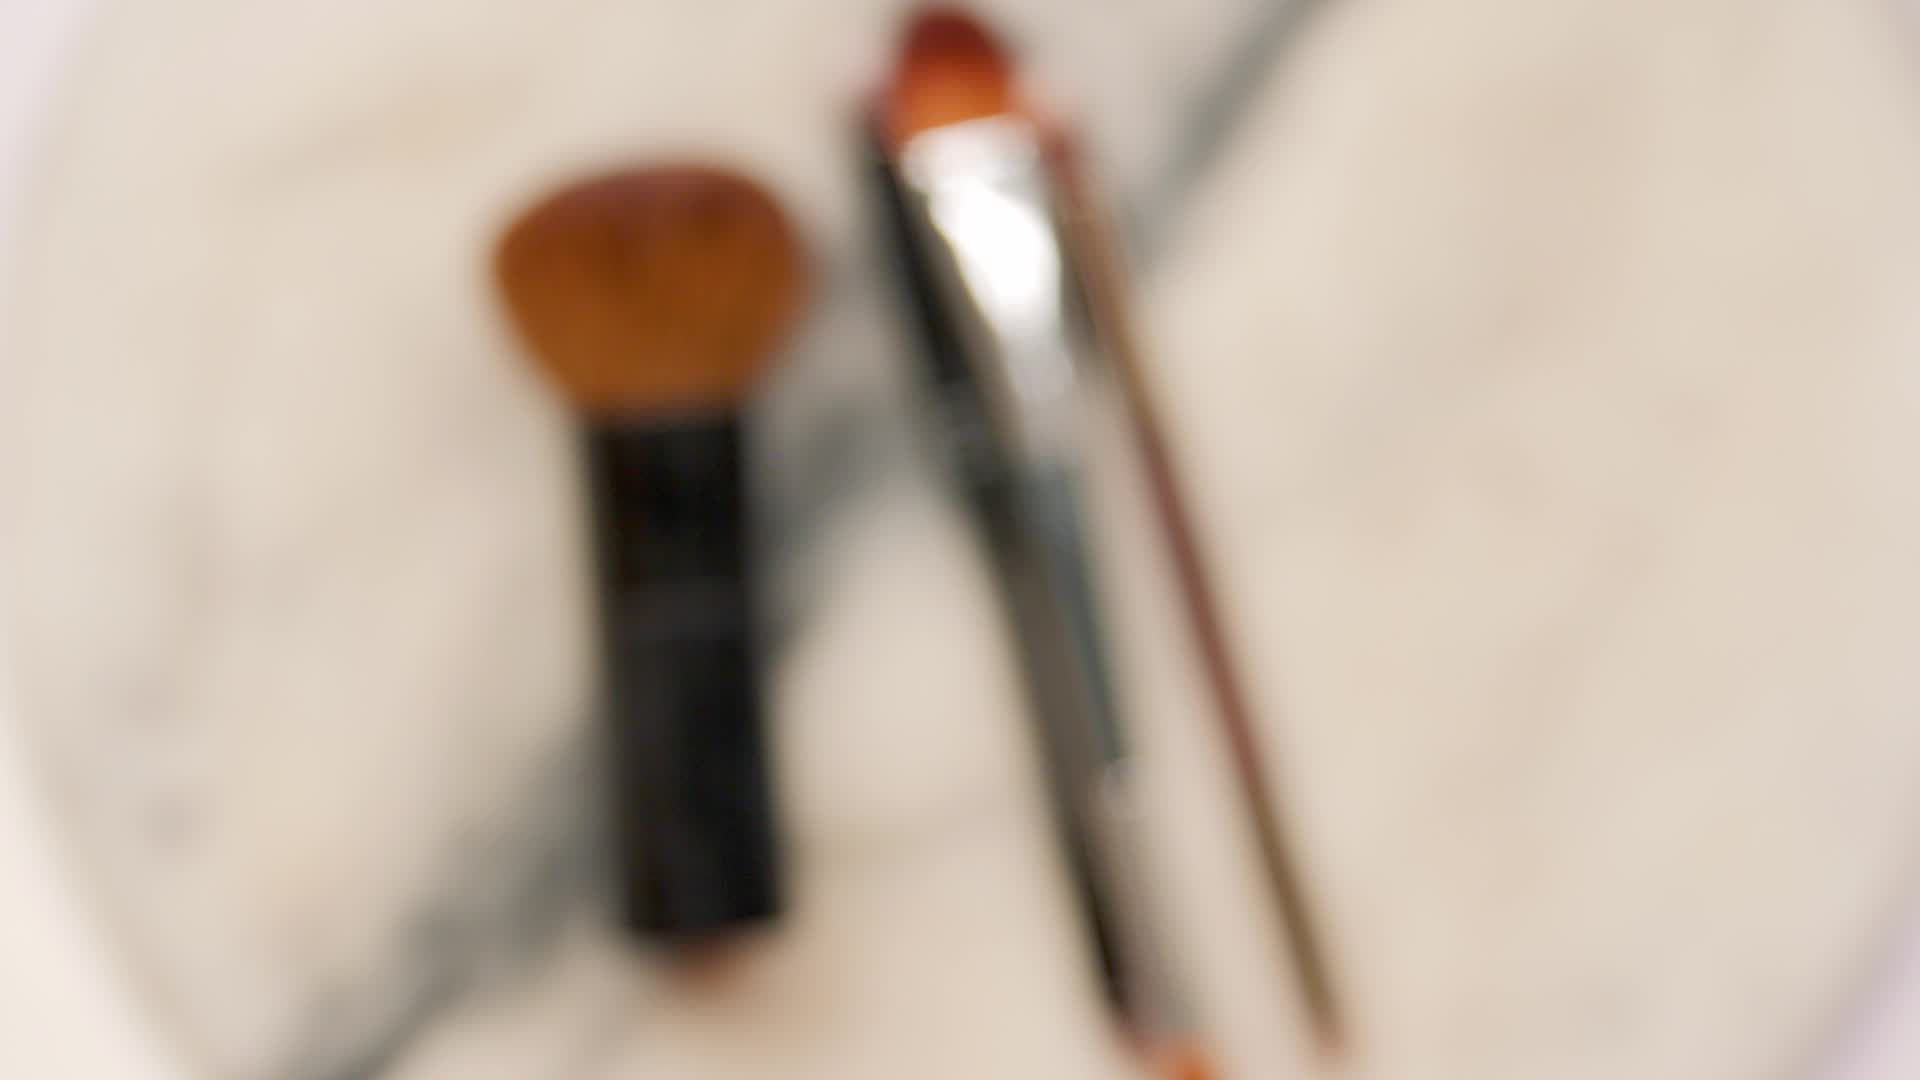 How to Clean Makeup Brushes Properly for Healthier Skin